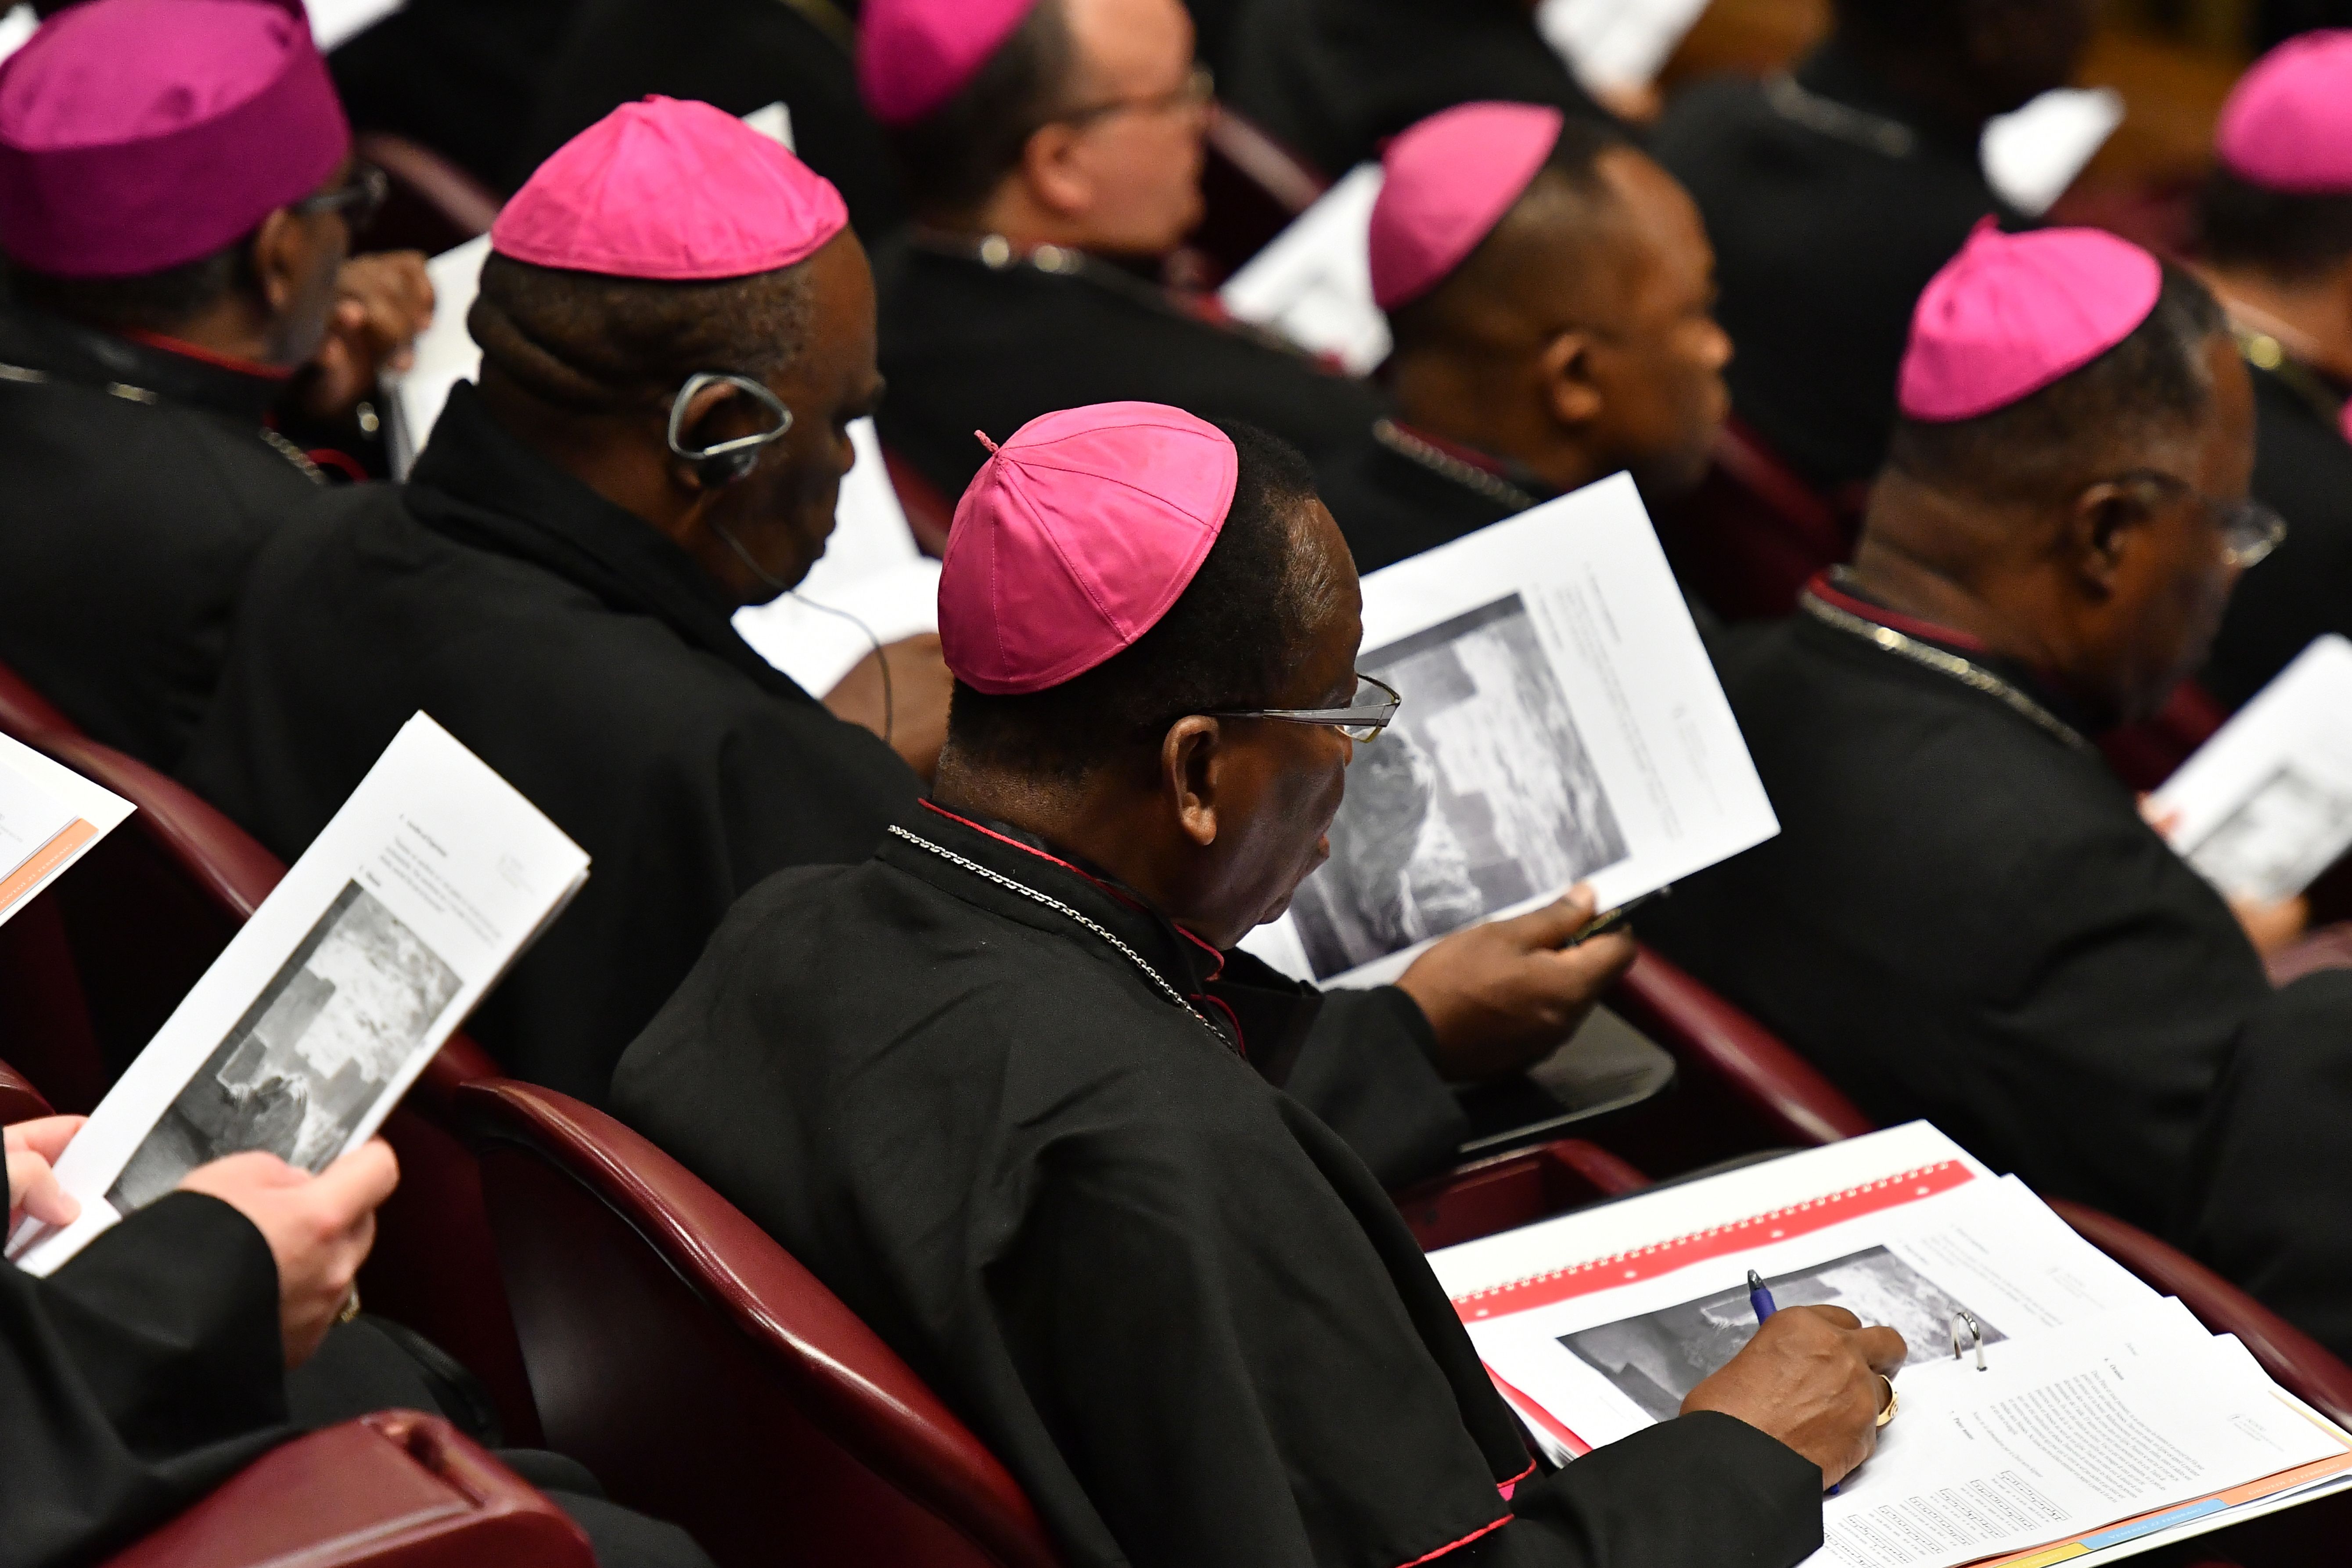 Bishops attend the opening of a global child protection summit for reflections on the sex abuse crisis within the Catholic Church, on February 21, 2019 at the Vatican. (VINCENZO PINTO/AFP/Getty Images)